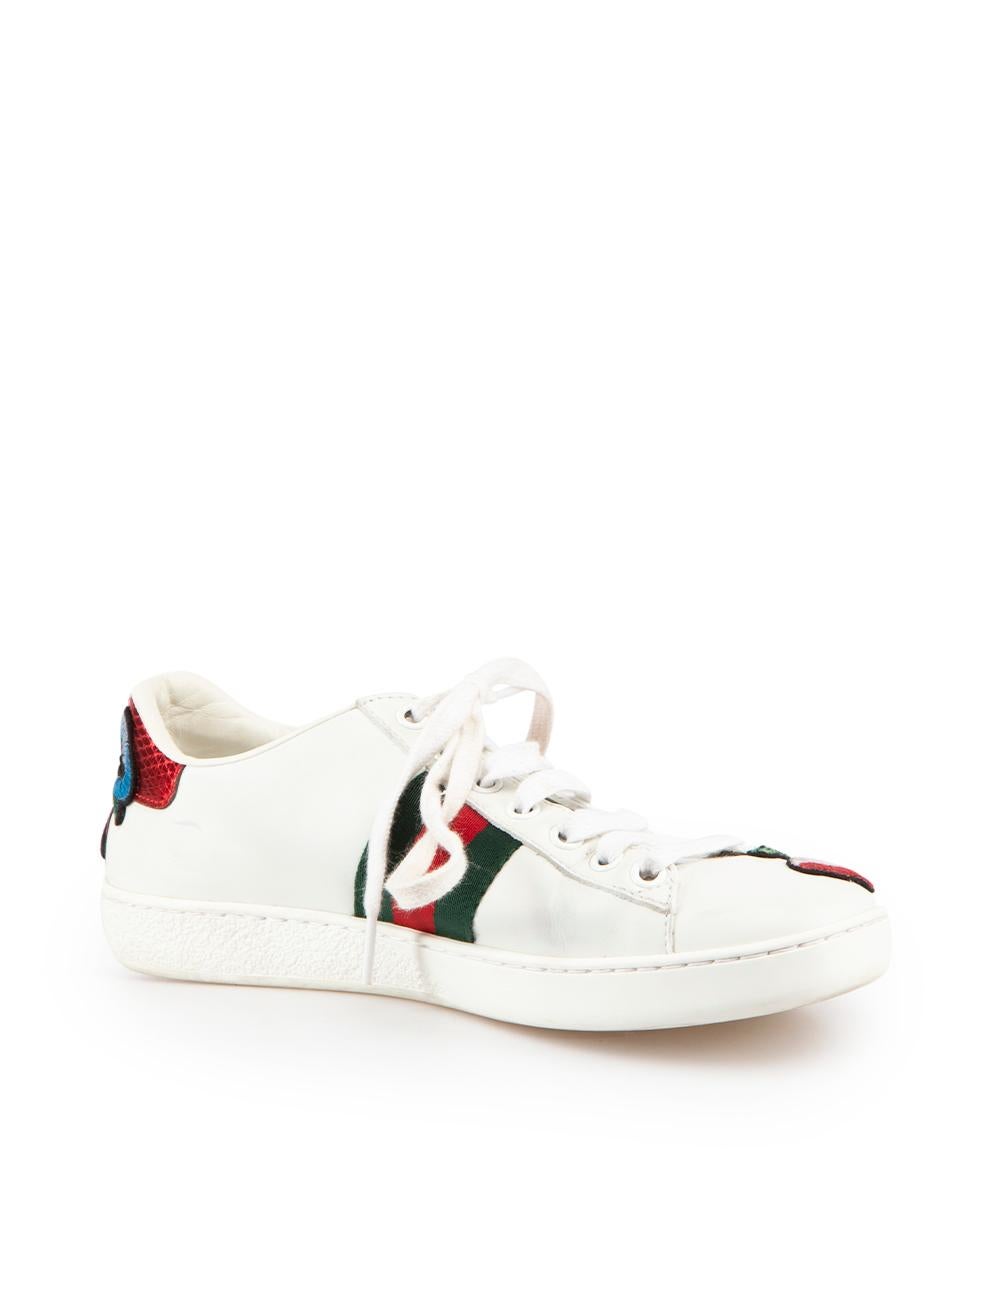 CONDITION is Good. Minor wear to shoes is evident. Light wear to both sides, rubber soles, toes and laces of both shoes with discoloured marks on this used Gucci designer resale item.
 
 Details
 White
 Leather
 Low top trainers
 Round toe
 Flat